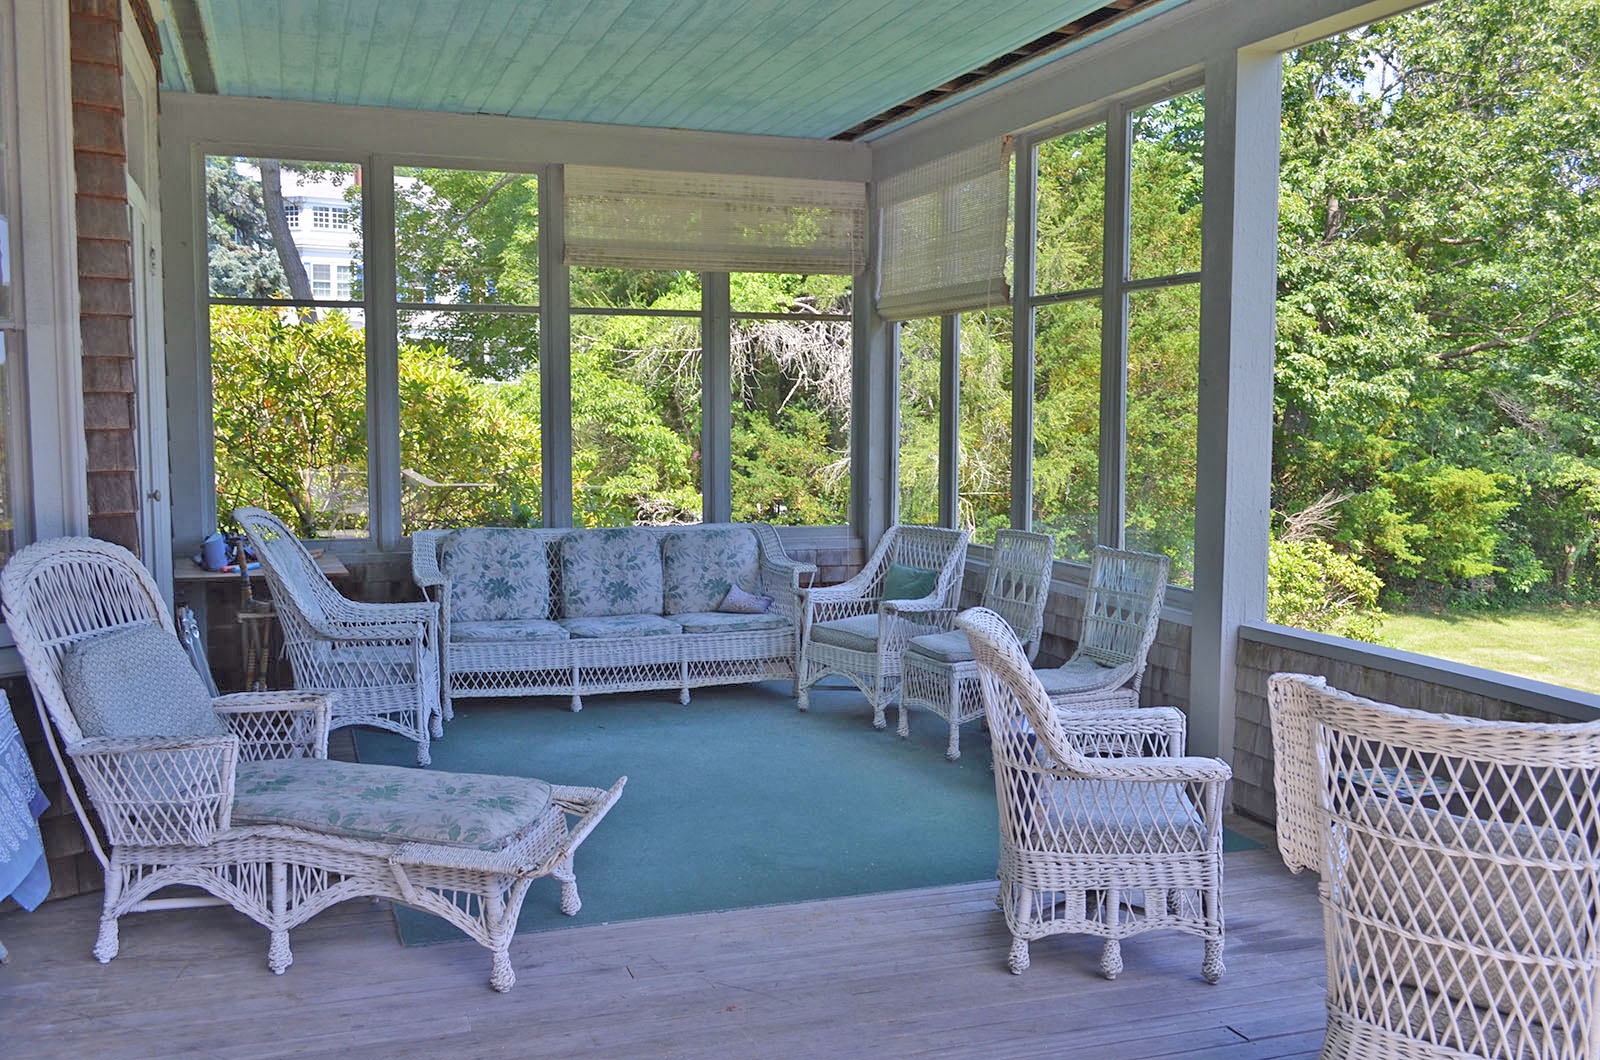 Enjoy a cool breeze from the shade of the generous back porch.